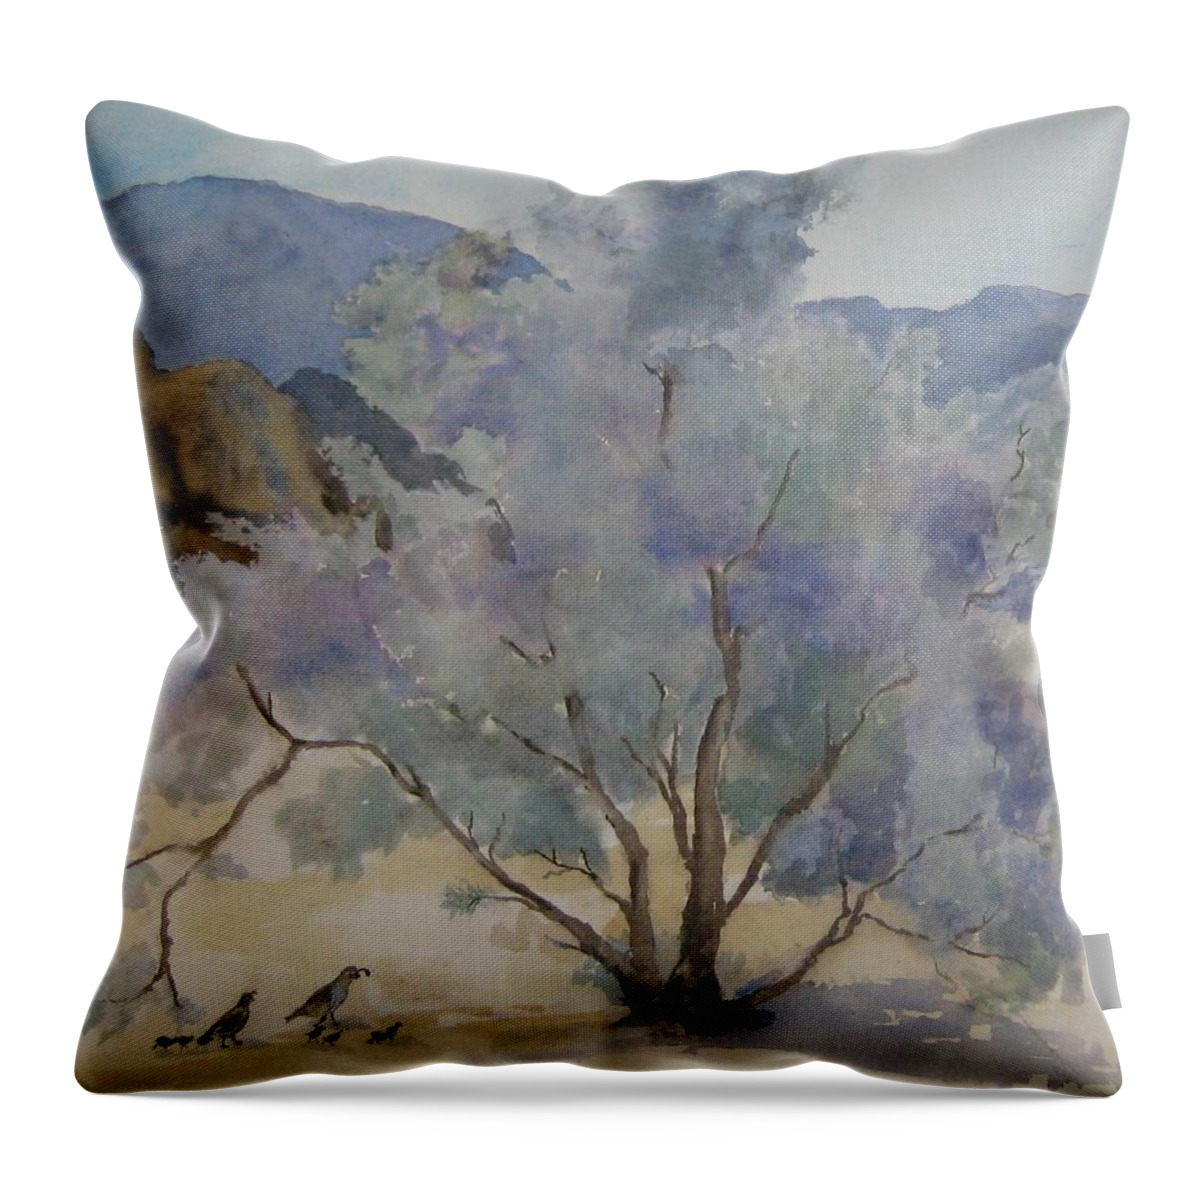 Smoketree Throw Pillow featuring the painting Smoketree in Bloom by Maria Hunt